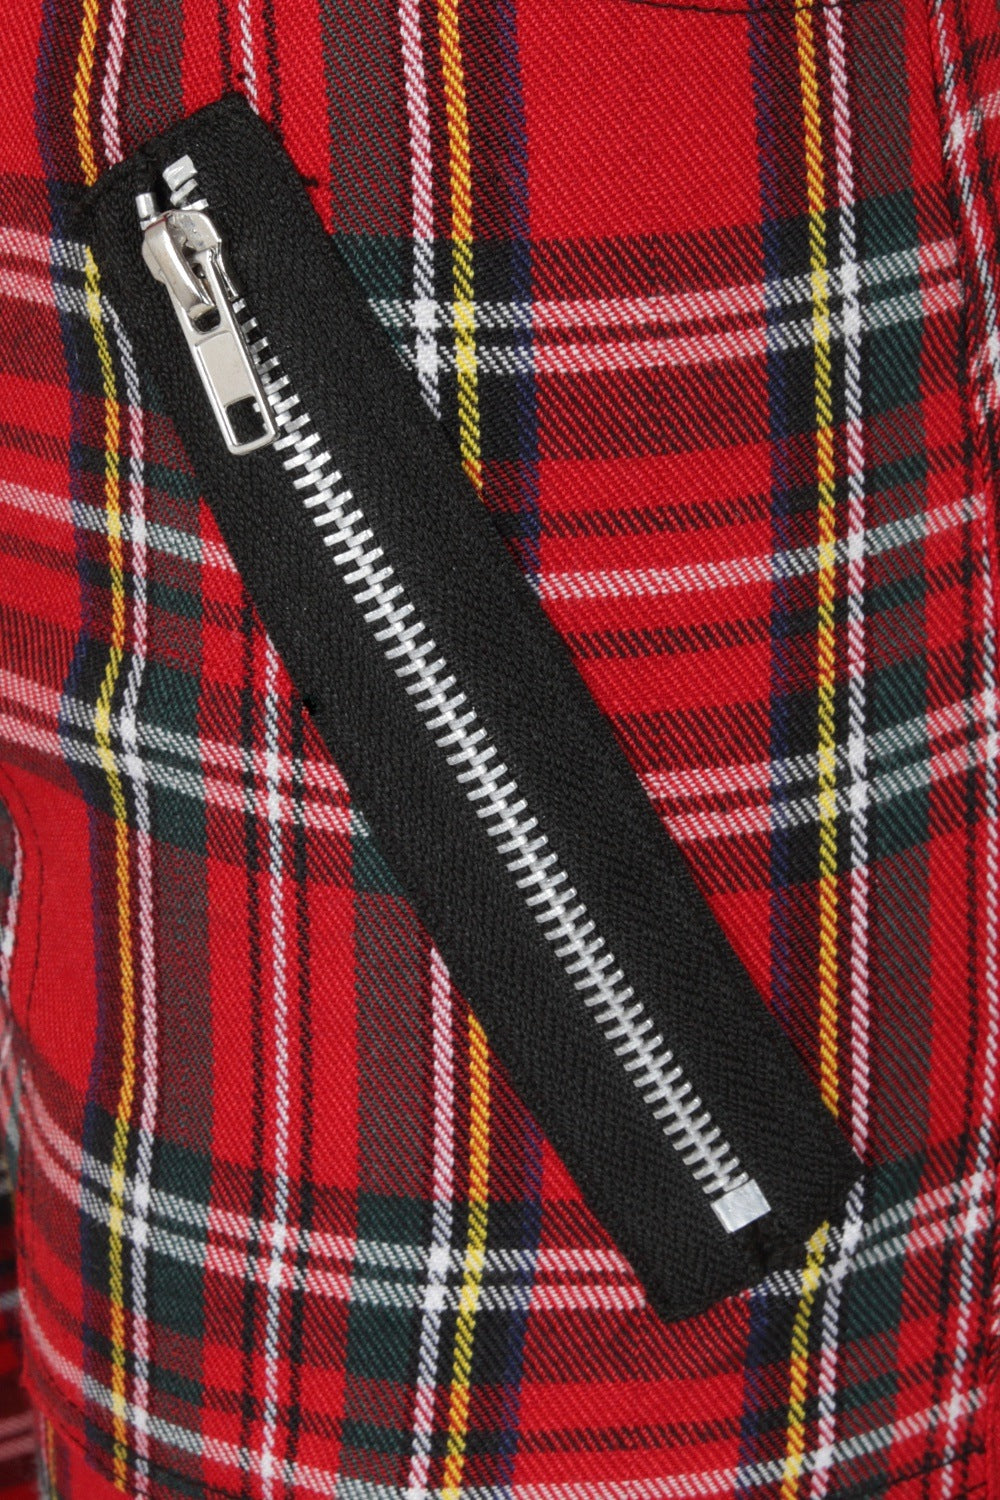 detail shot of zip feature on red tartan trousers